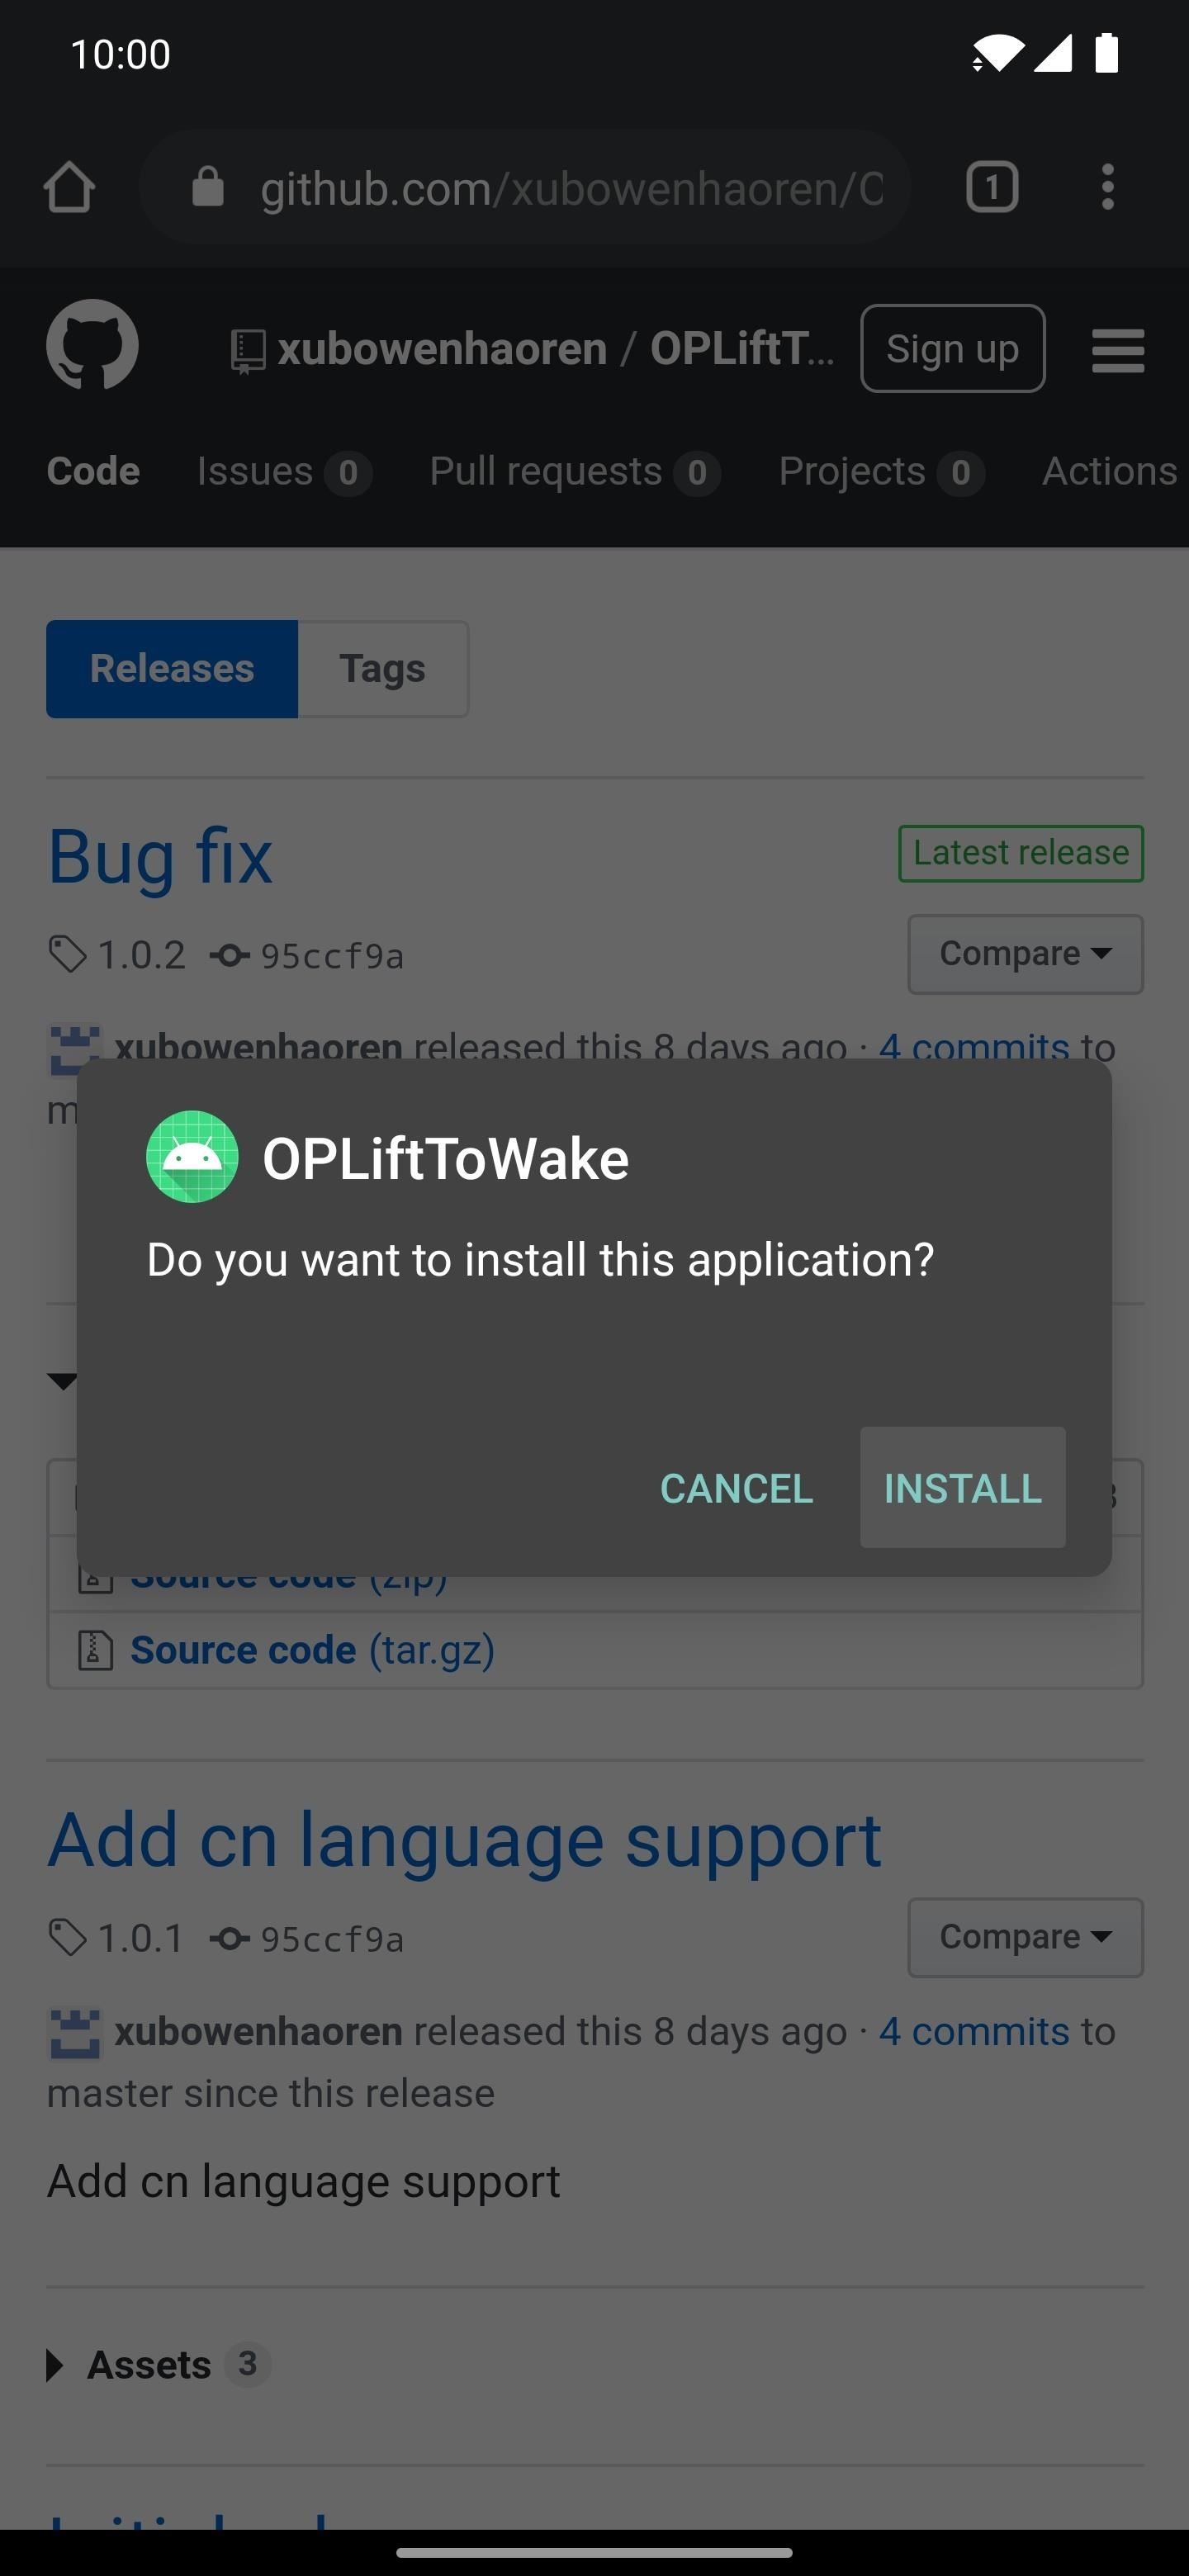 Make OnePlus' Lift to Wake Feature Show the Lock Screen Instead of the Always-on Display